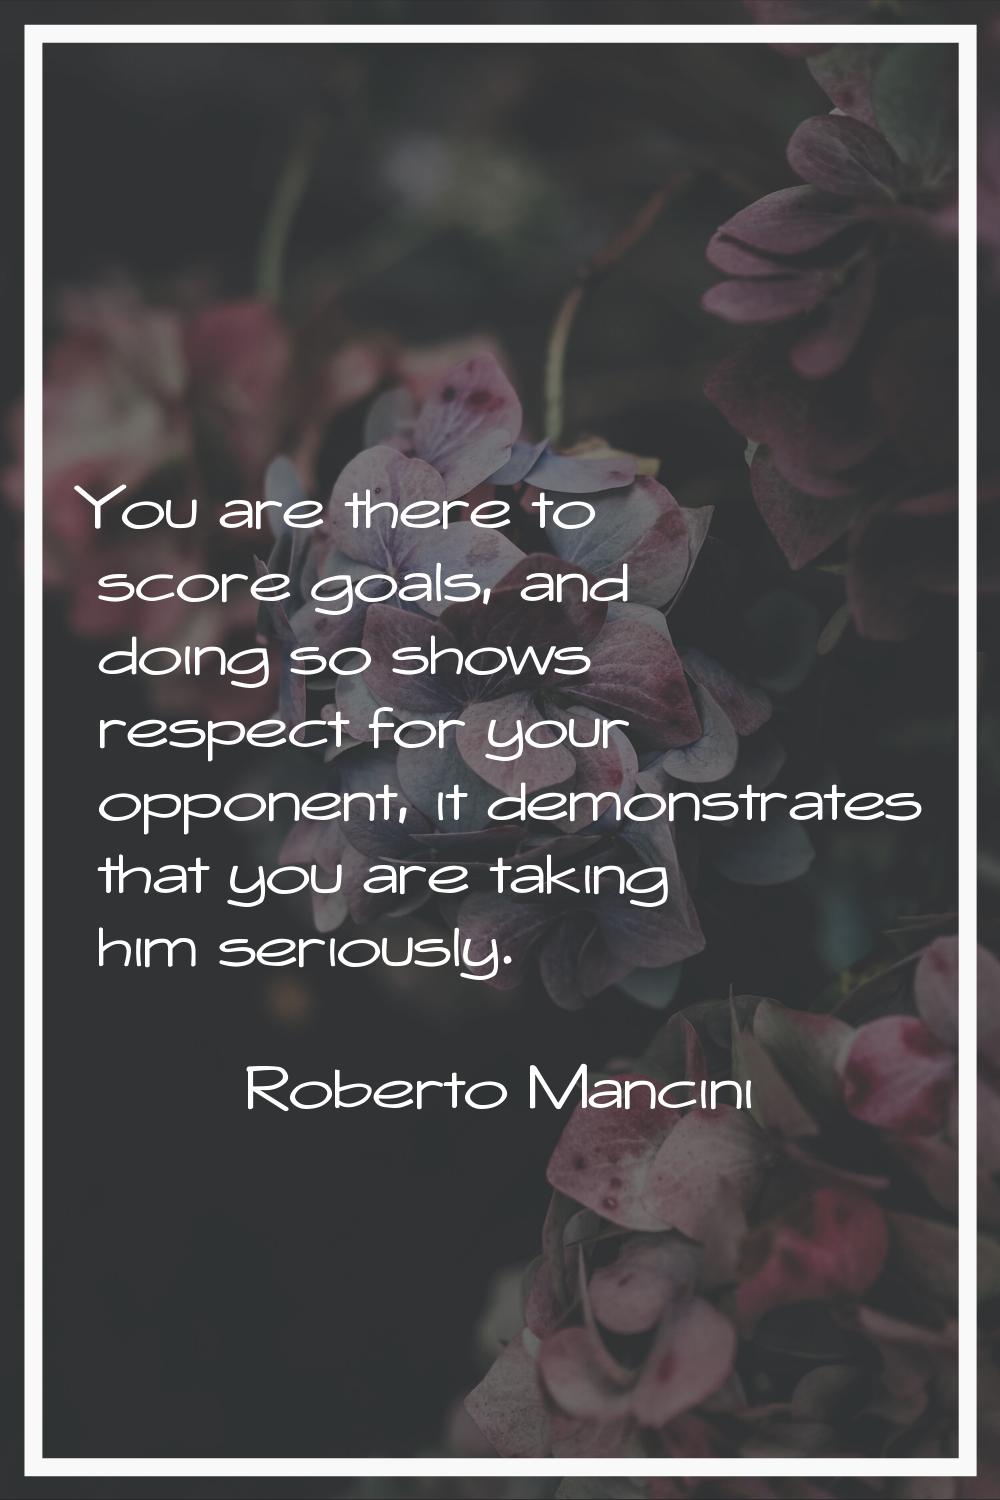 You are there to score goals, and doing so shows respect for your opponent, it demonstrates that yo